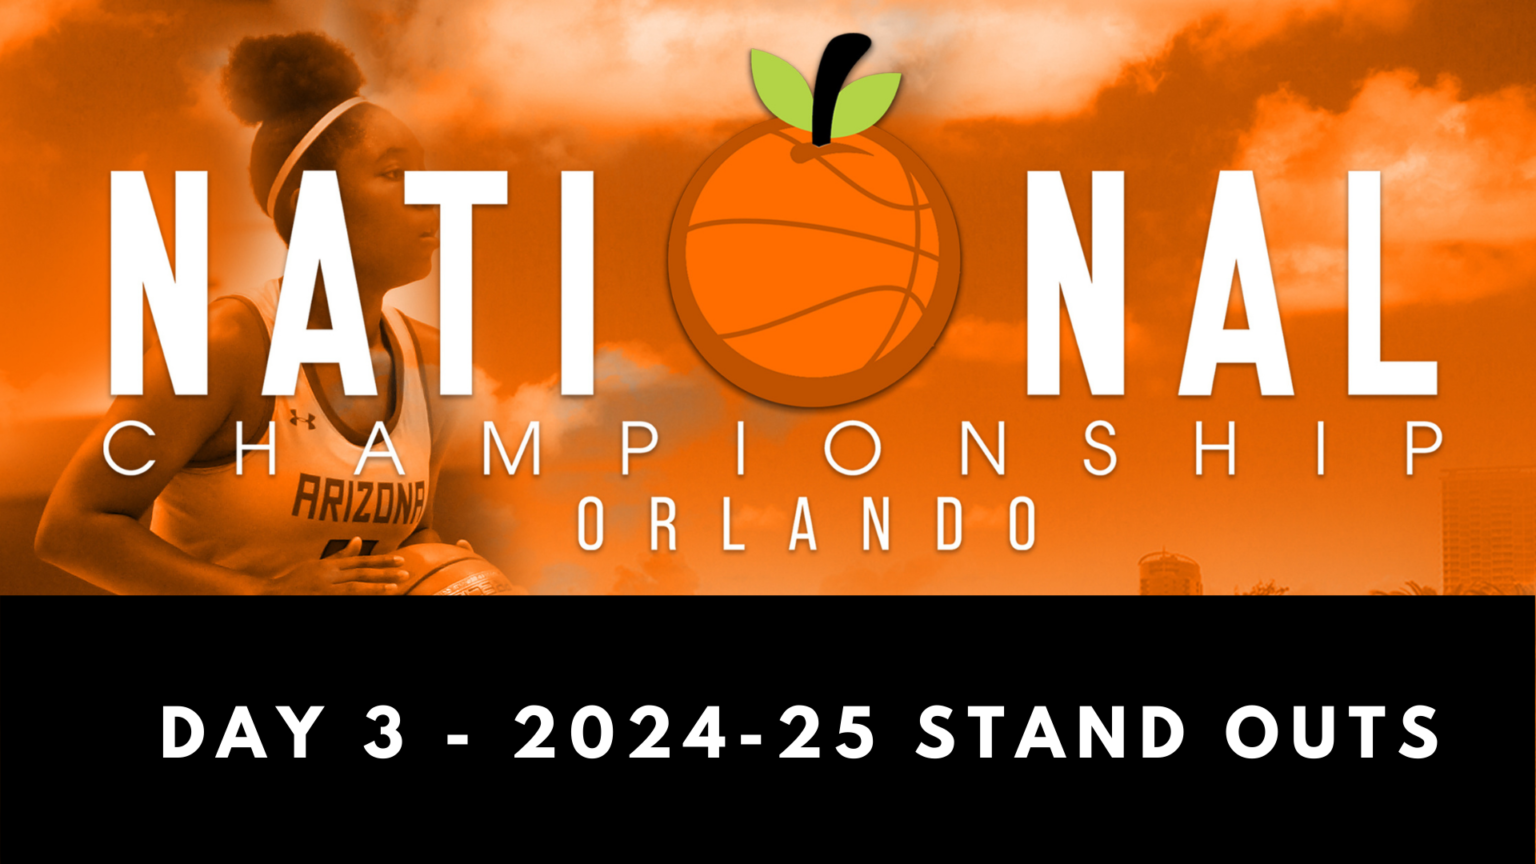 202425 Standouts from Day 3 2021 National Championship Prep Girls